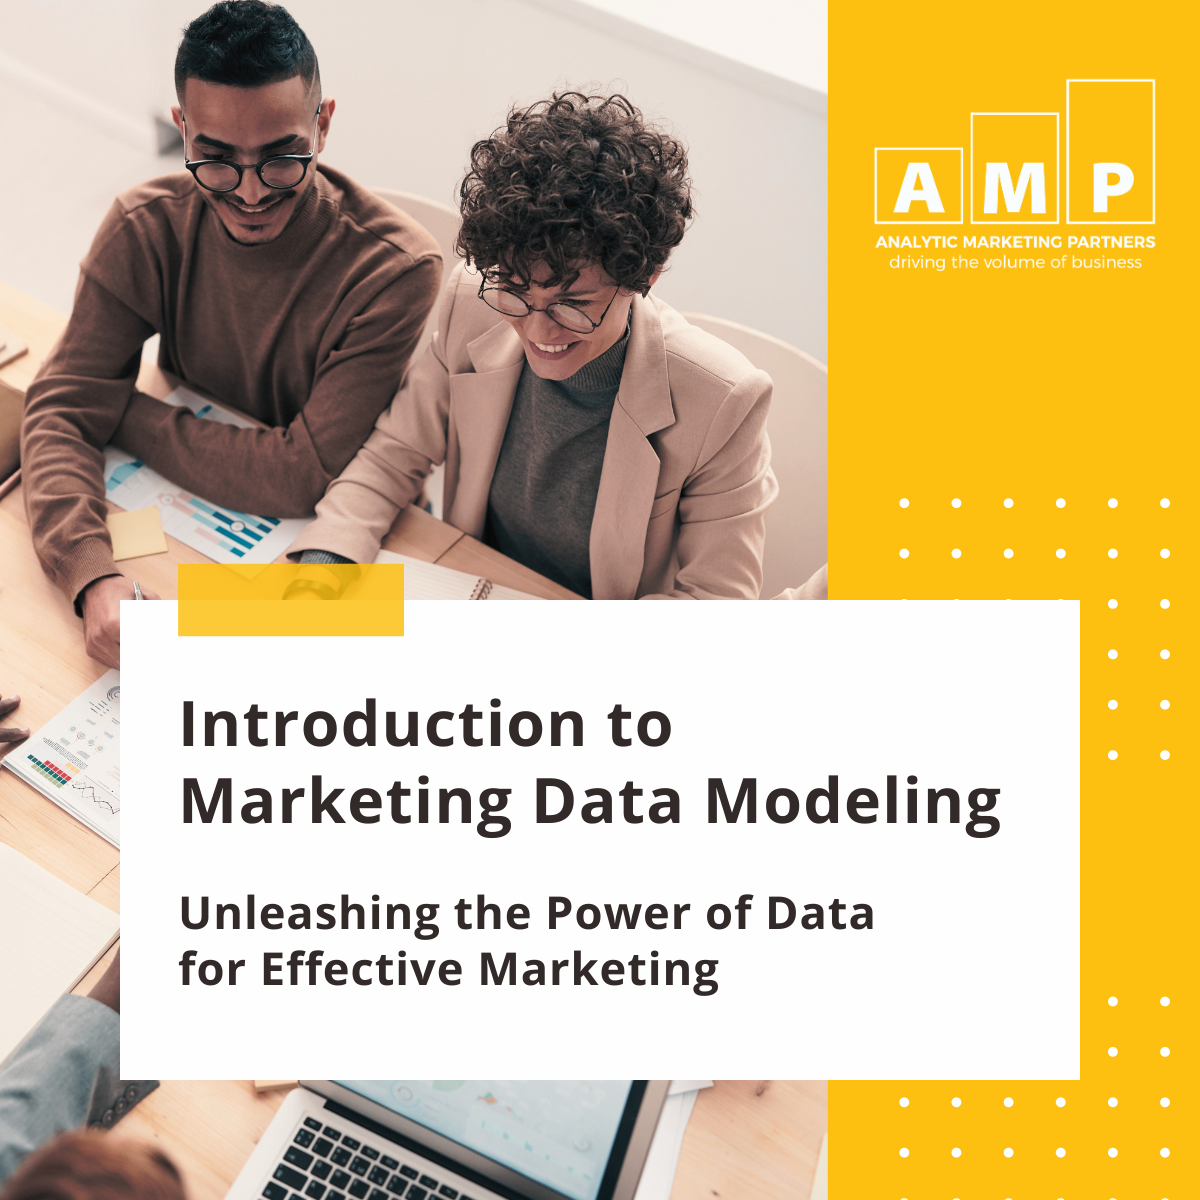 Introduction to Marketing Data Modeling